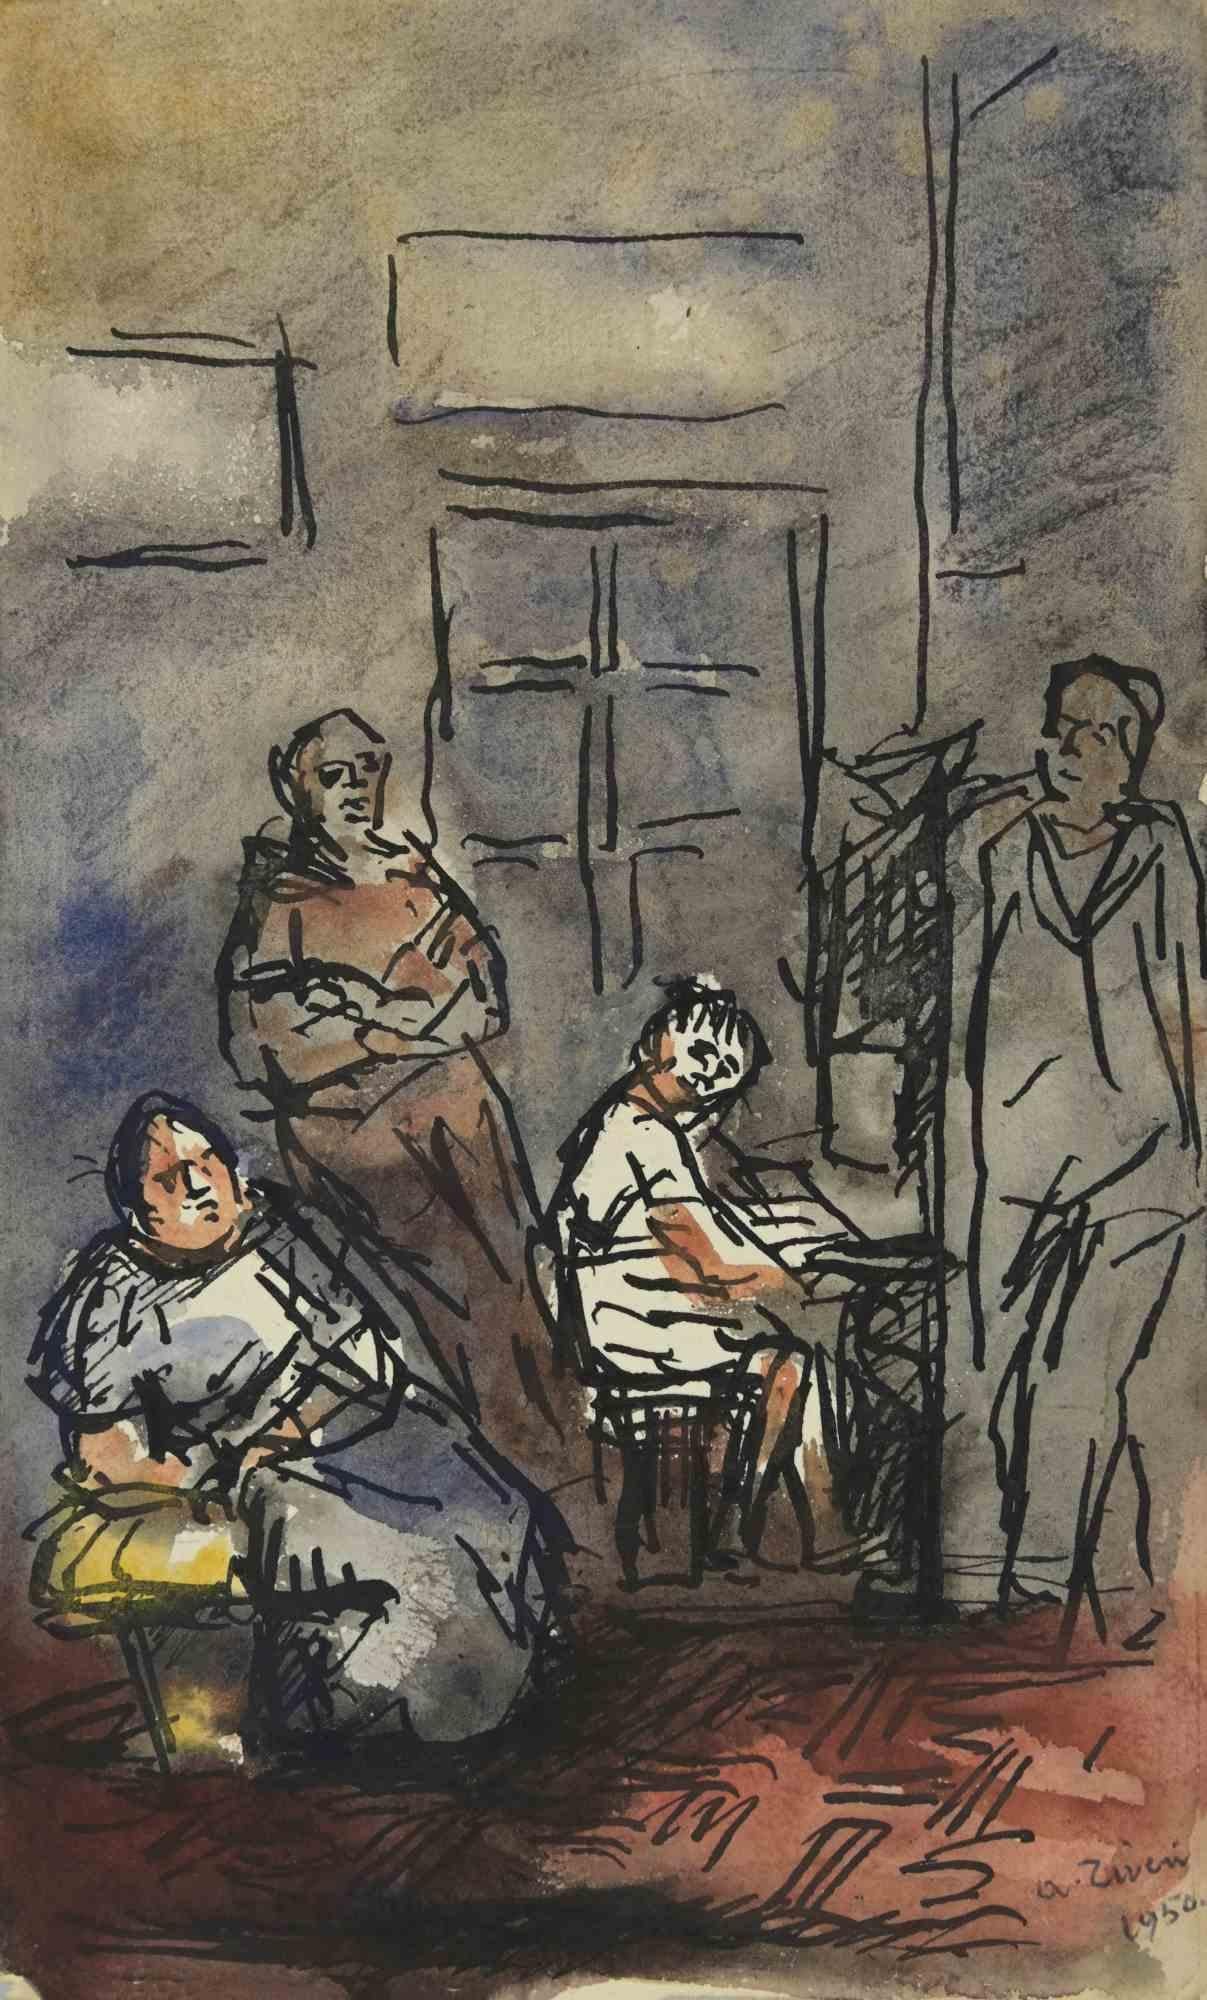 The Piano Listeners is a drawing realized by Alberto Ziveri in 1950

Ink and Watercolor on paper.

Hand-signed.

In good conditions. 

The artwork is represented through deft strokes masterly.

Alberto Ziveri (Rome,1908 – 1990), the Italian painter